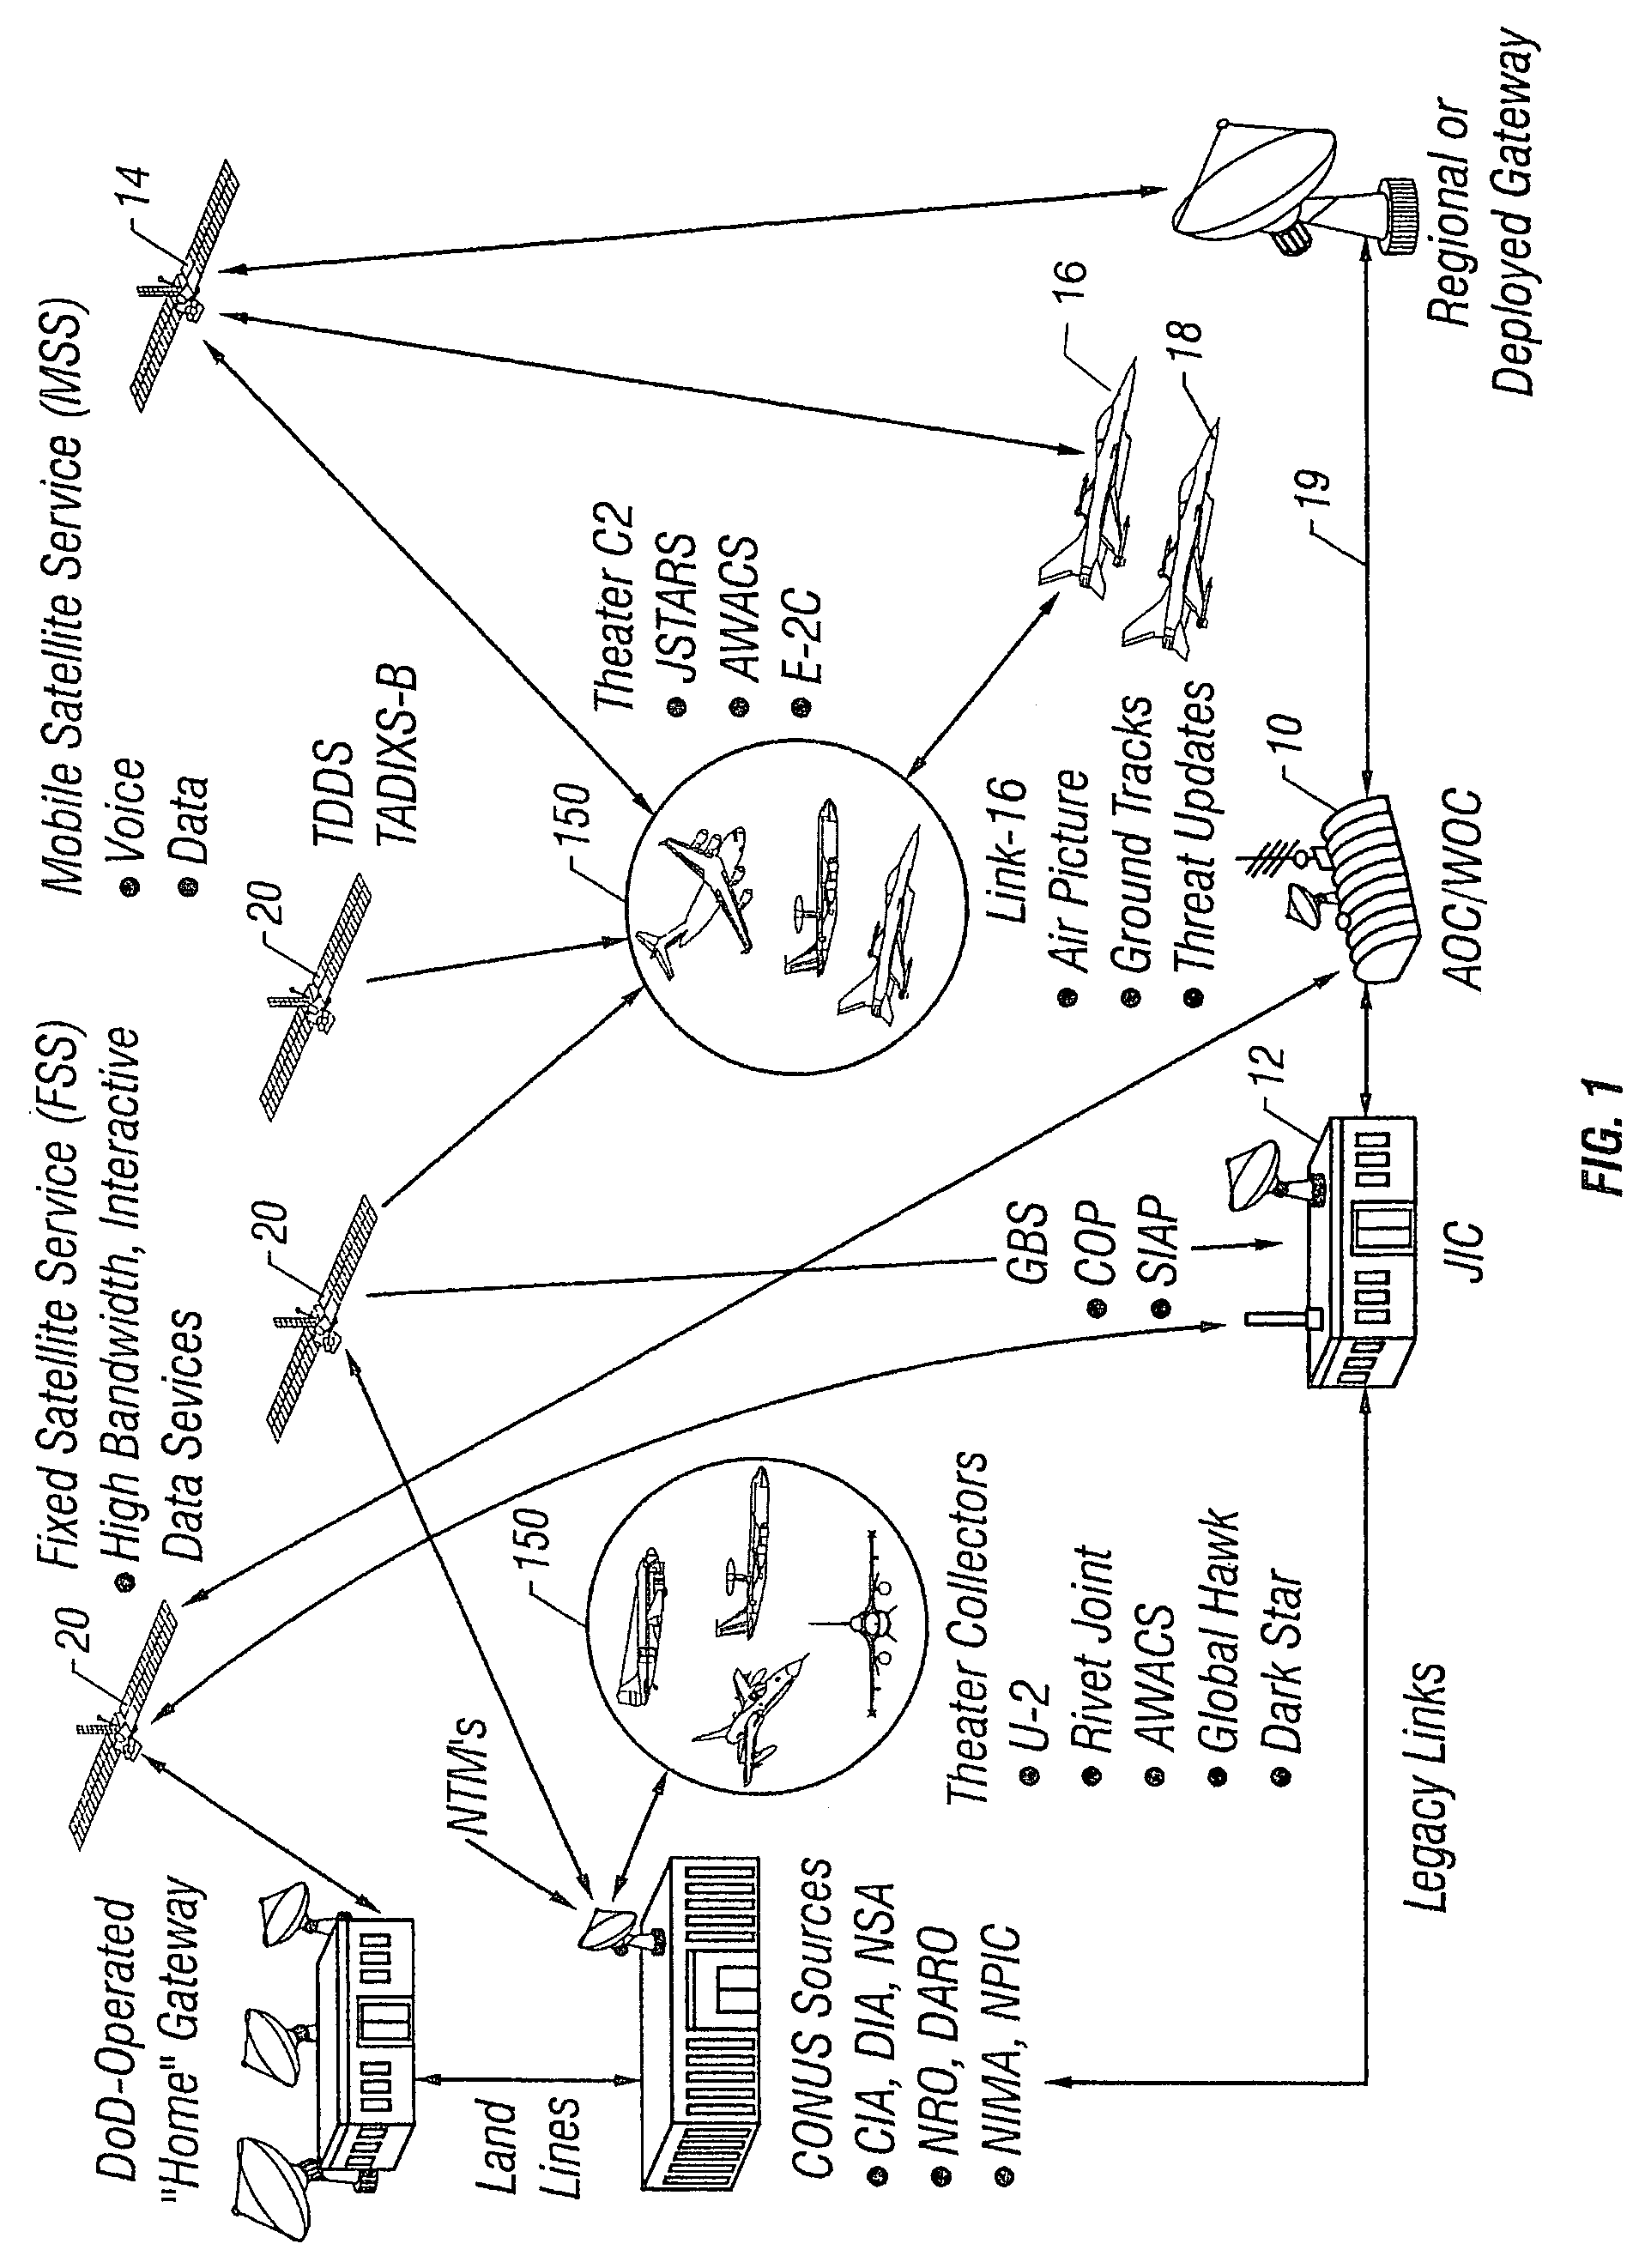 System and method for interfacing satellite communications with aircraft